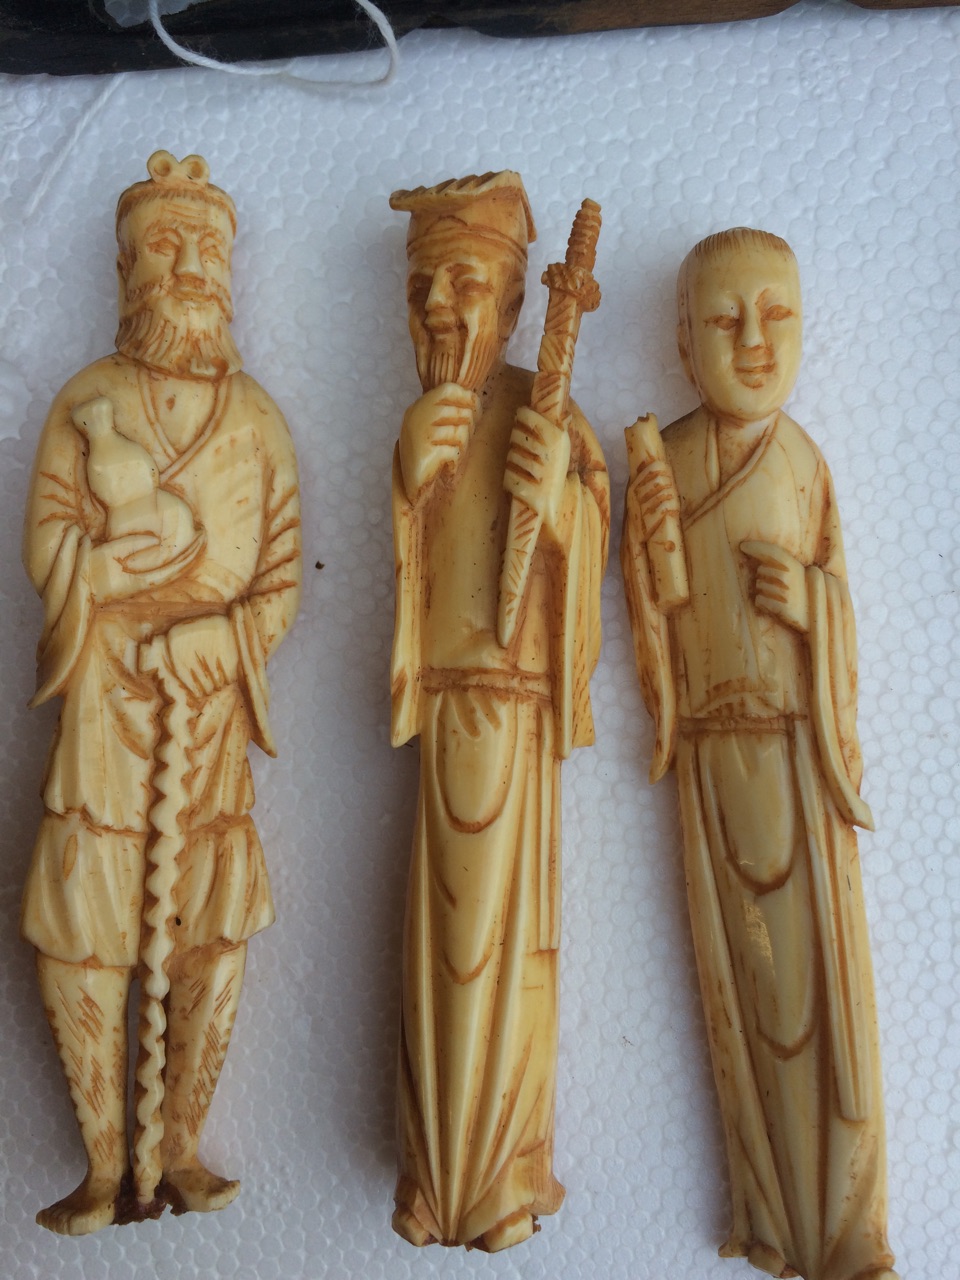 Lot of 8 Oriental c1920 Ivory Figures on Stand 4 1/4" (110mm) tall. - Image 2 of 6